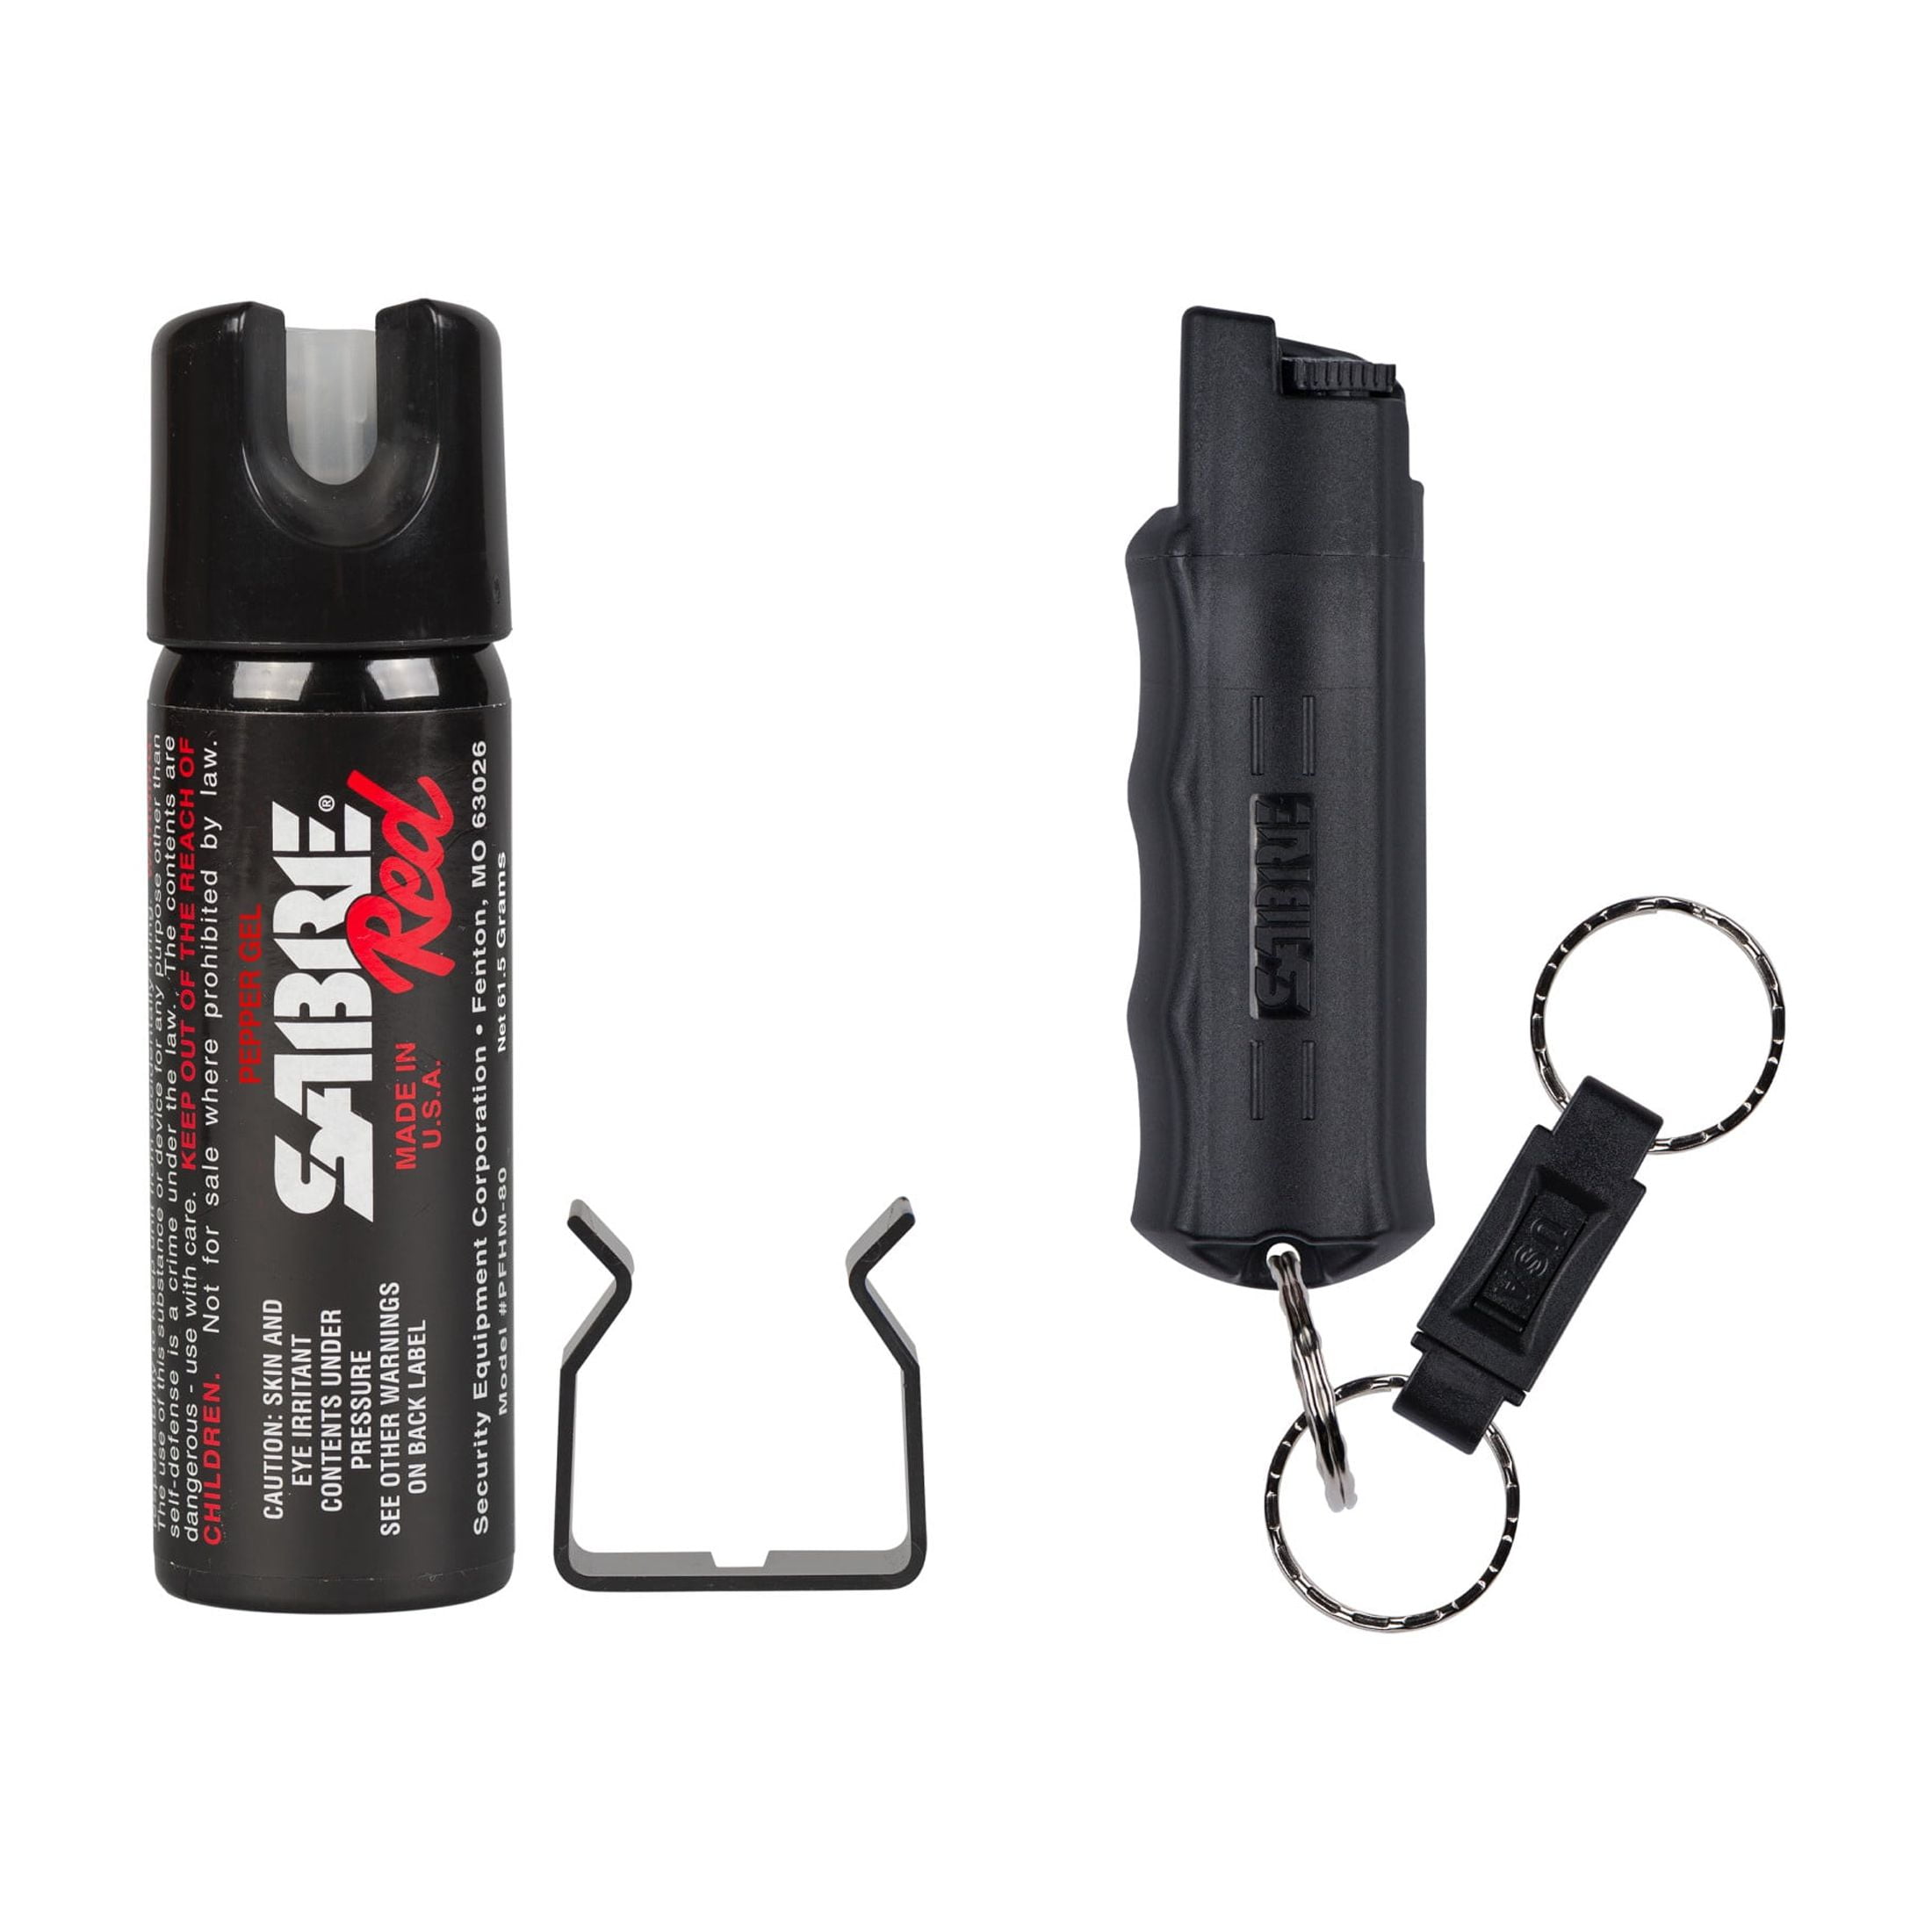 Meet our smallest pepper spray yet! Mighty Discreet Pepper Spray is ⇾ 40%  smaller ⇽ than traditional pepper sprays and: 💄About the size of a tube  of... | By SABRE SafetyFacebook